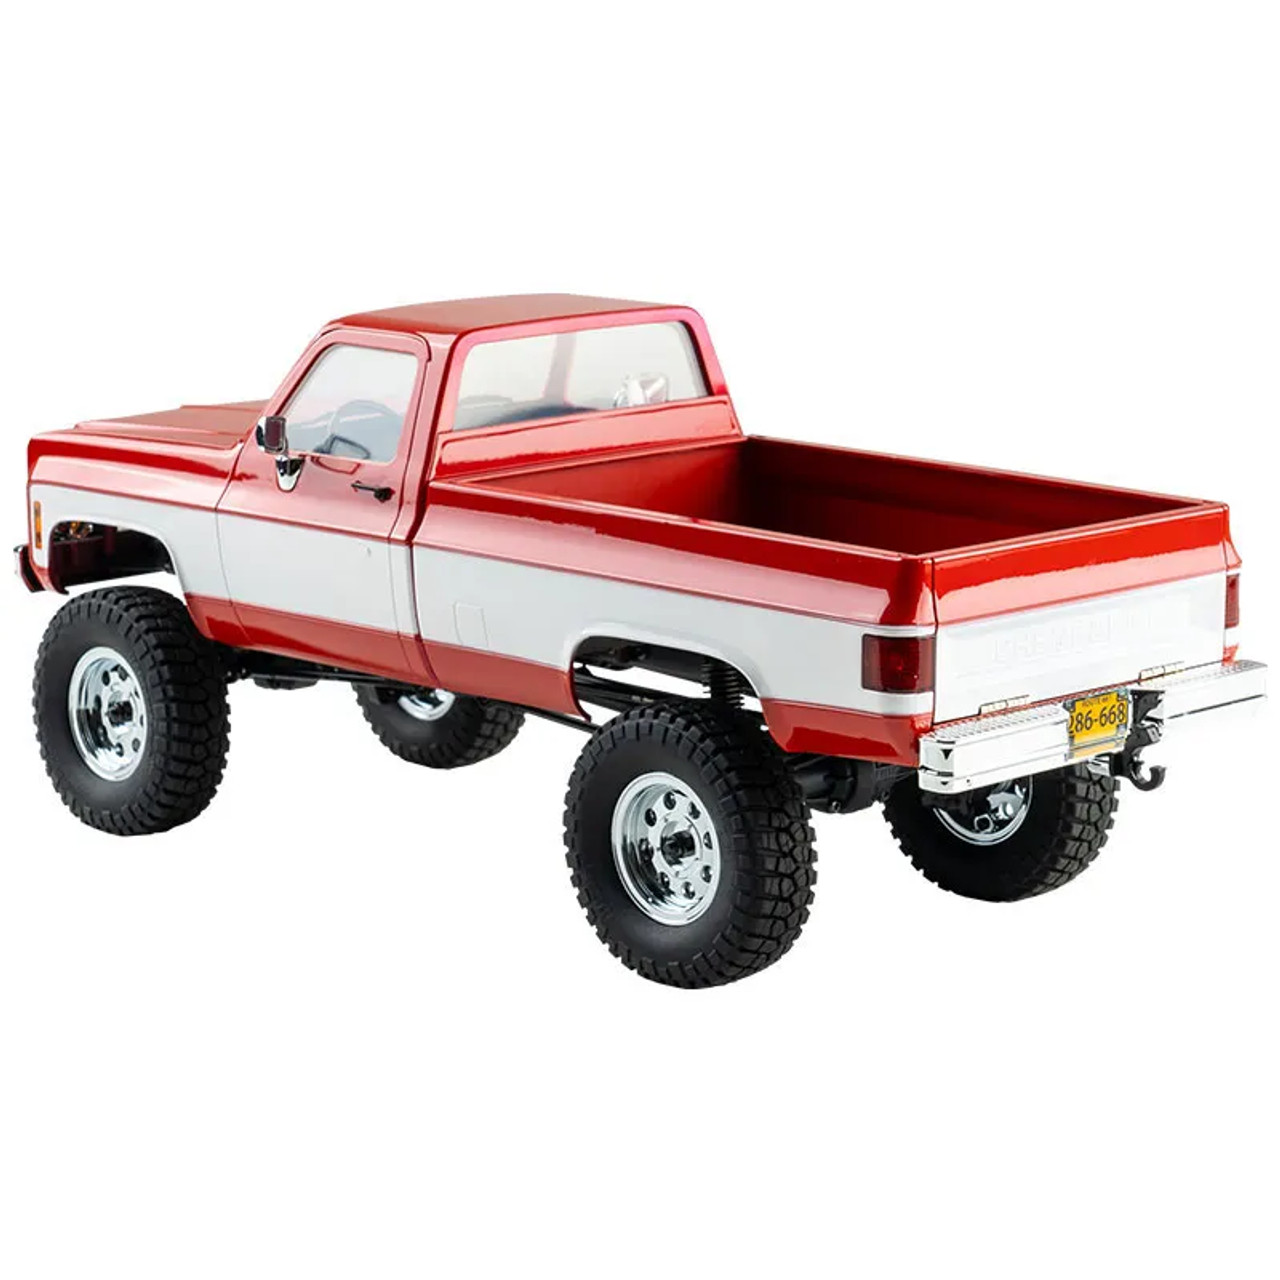 FMS FCX 18 1/18 Chevy K-10 RTR, Red